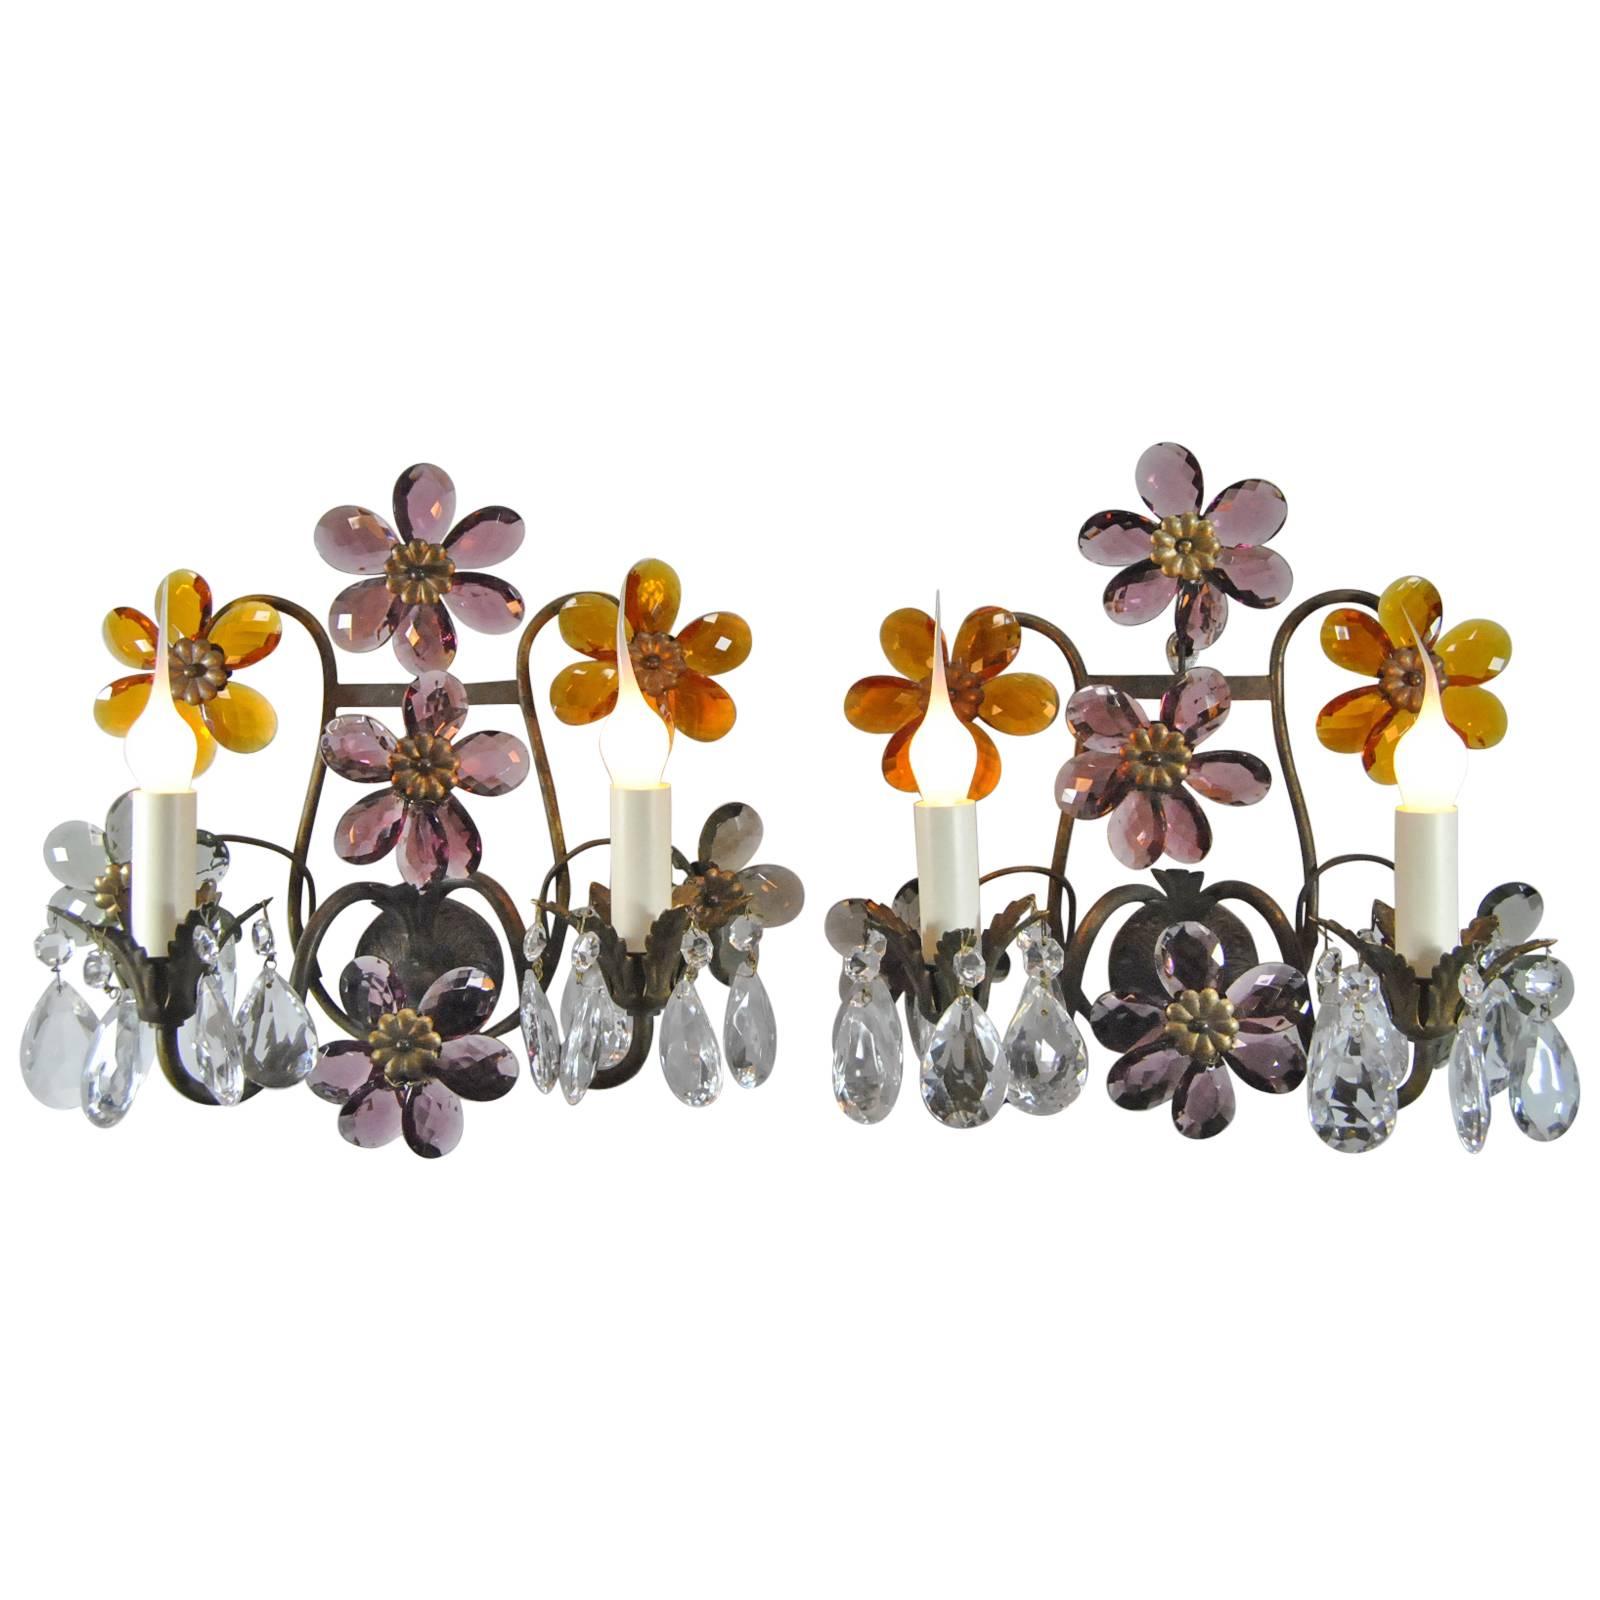 Antique French Bronze Wall Sconces, Pair with Cut Crystal Floral Design Details